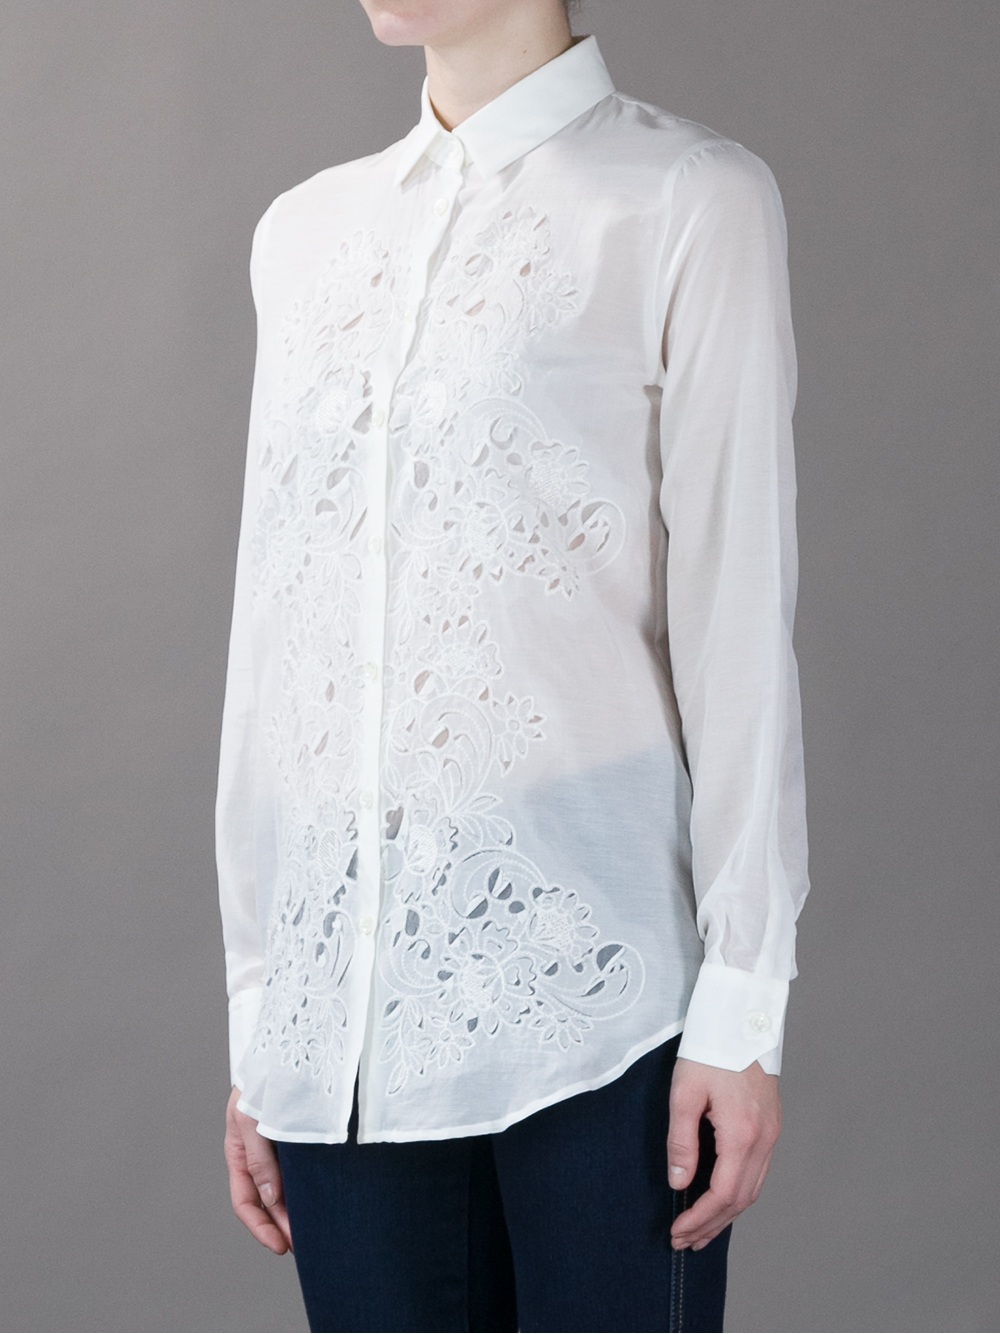 Etro Laser Cut Embroidered Front Shirt in White - Lyst